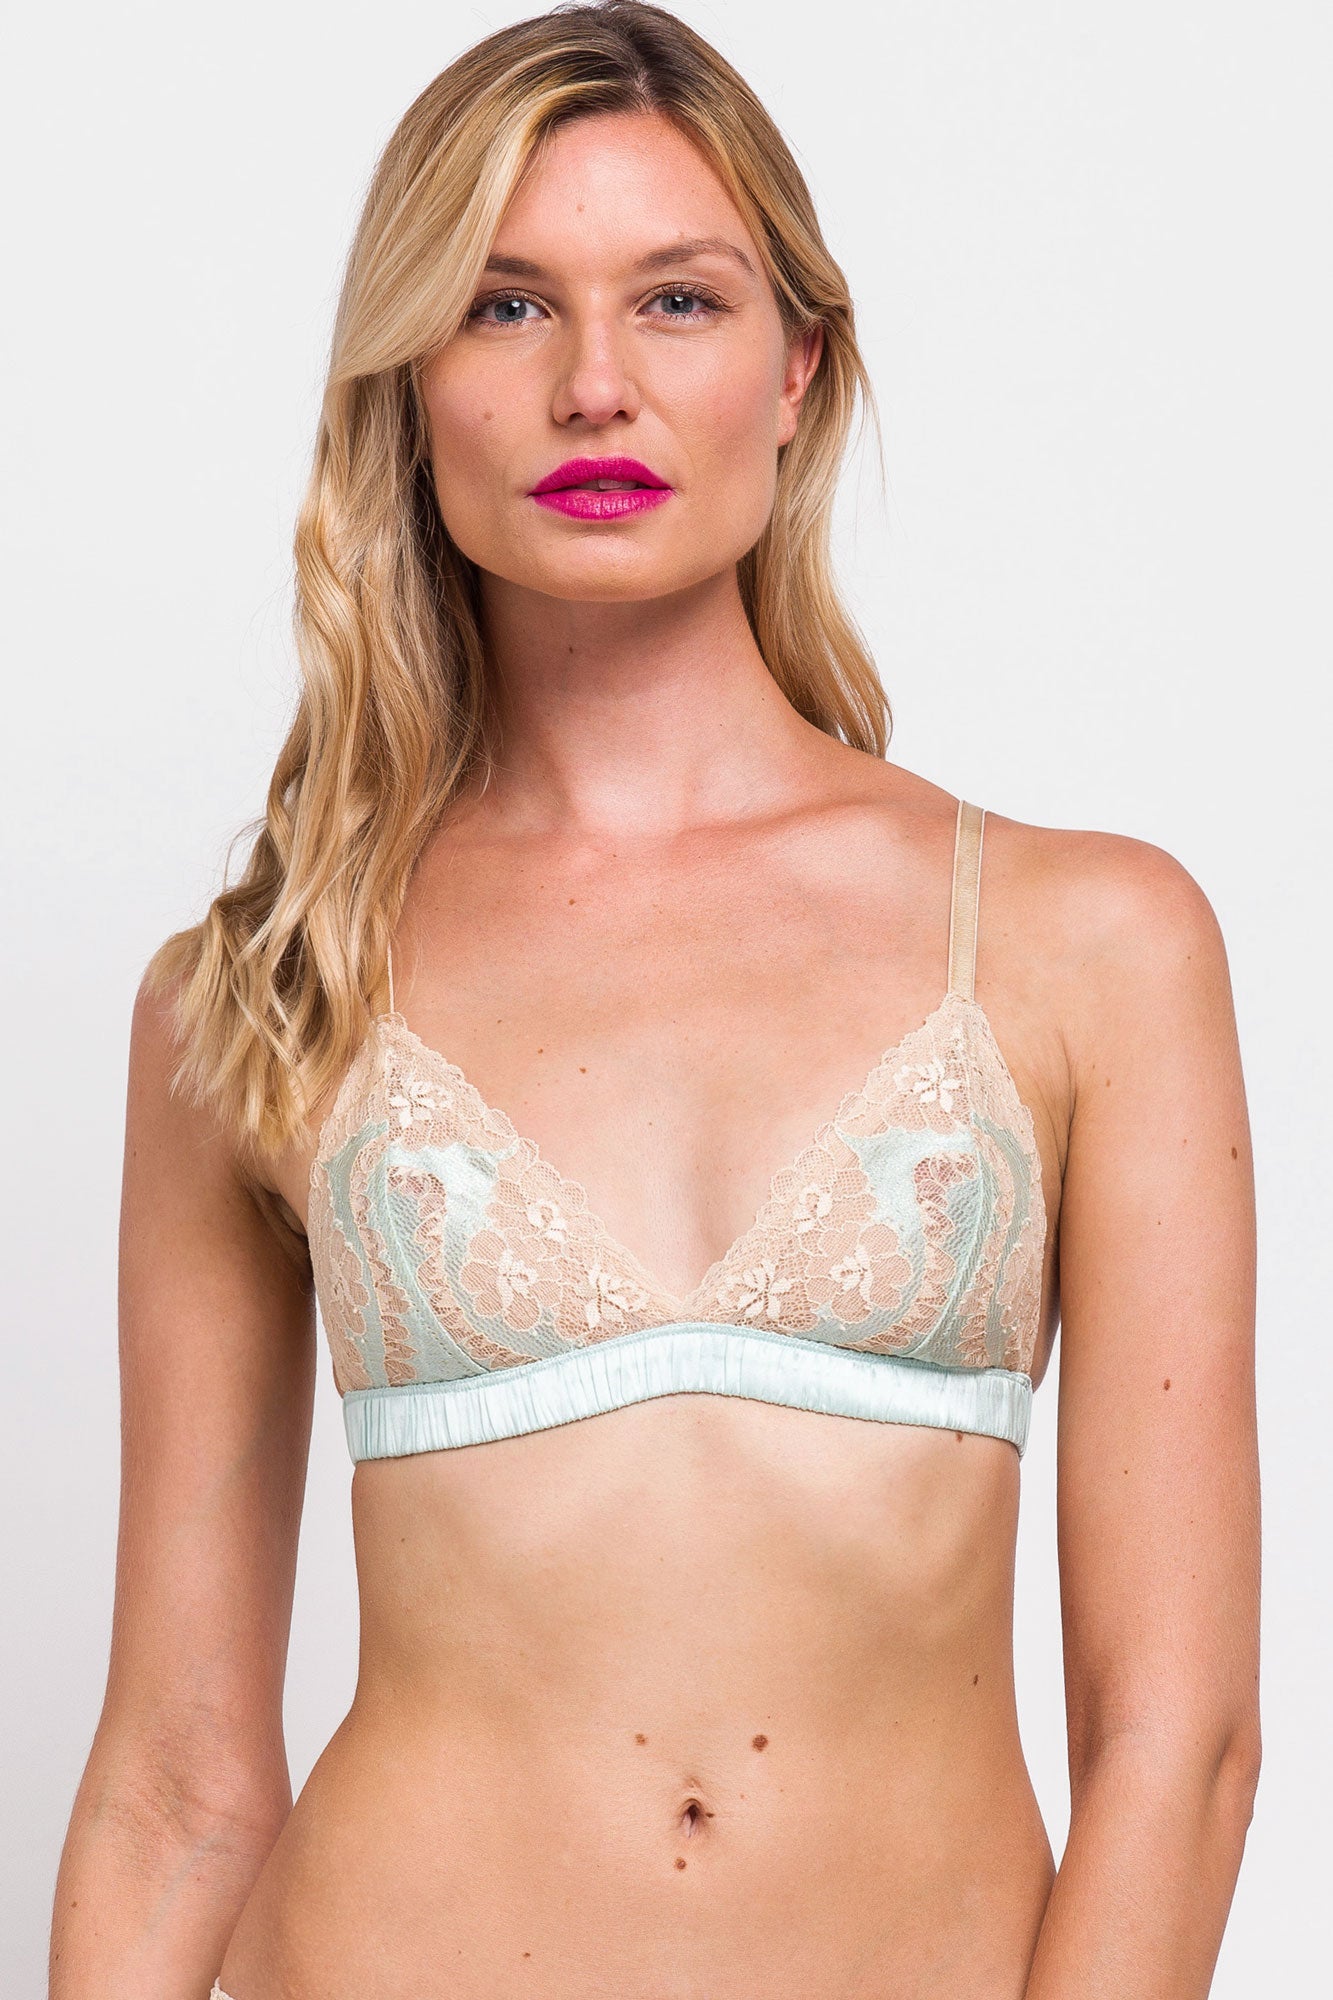 Vintage inspired bralettes with 100% silk band and lace cups in mint green and beige